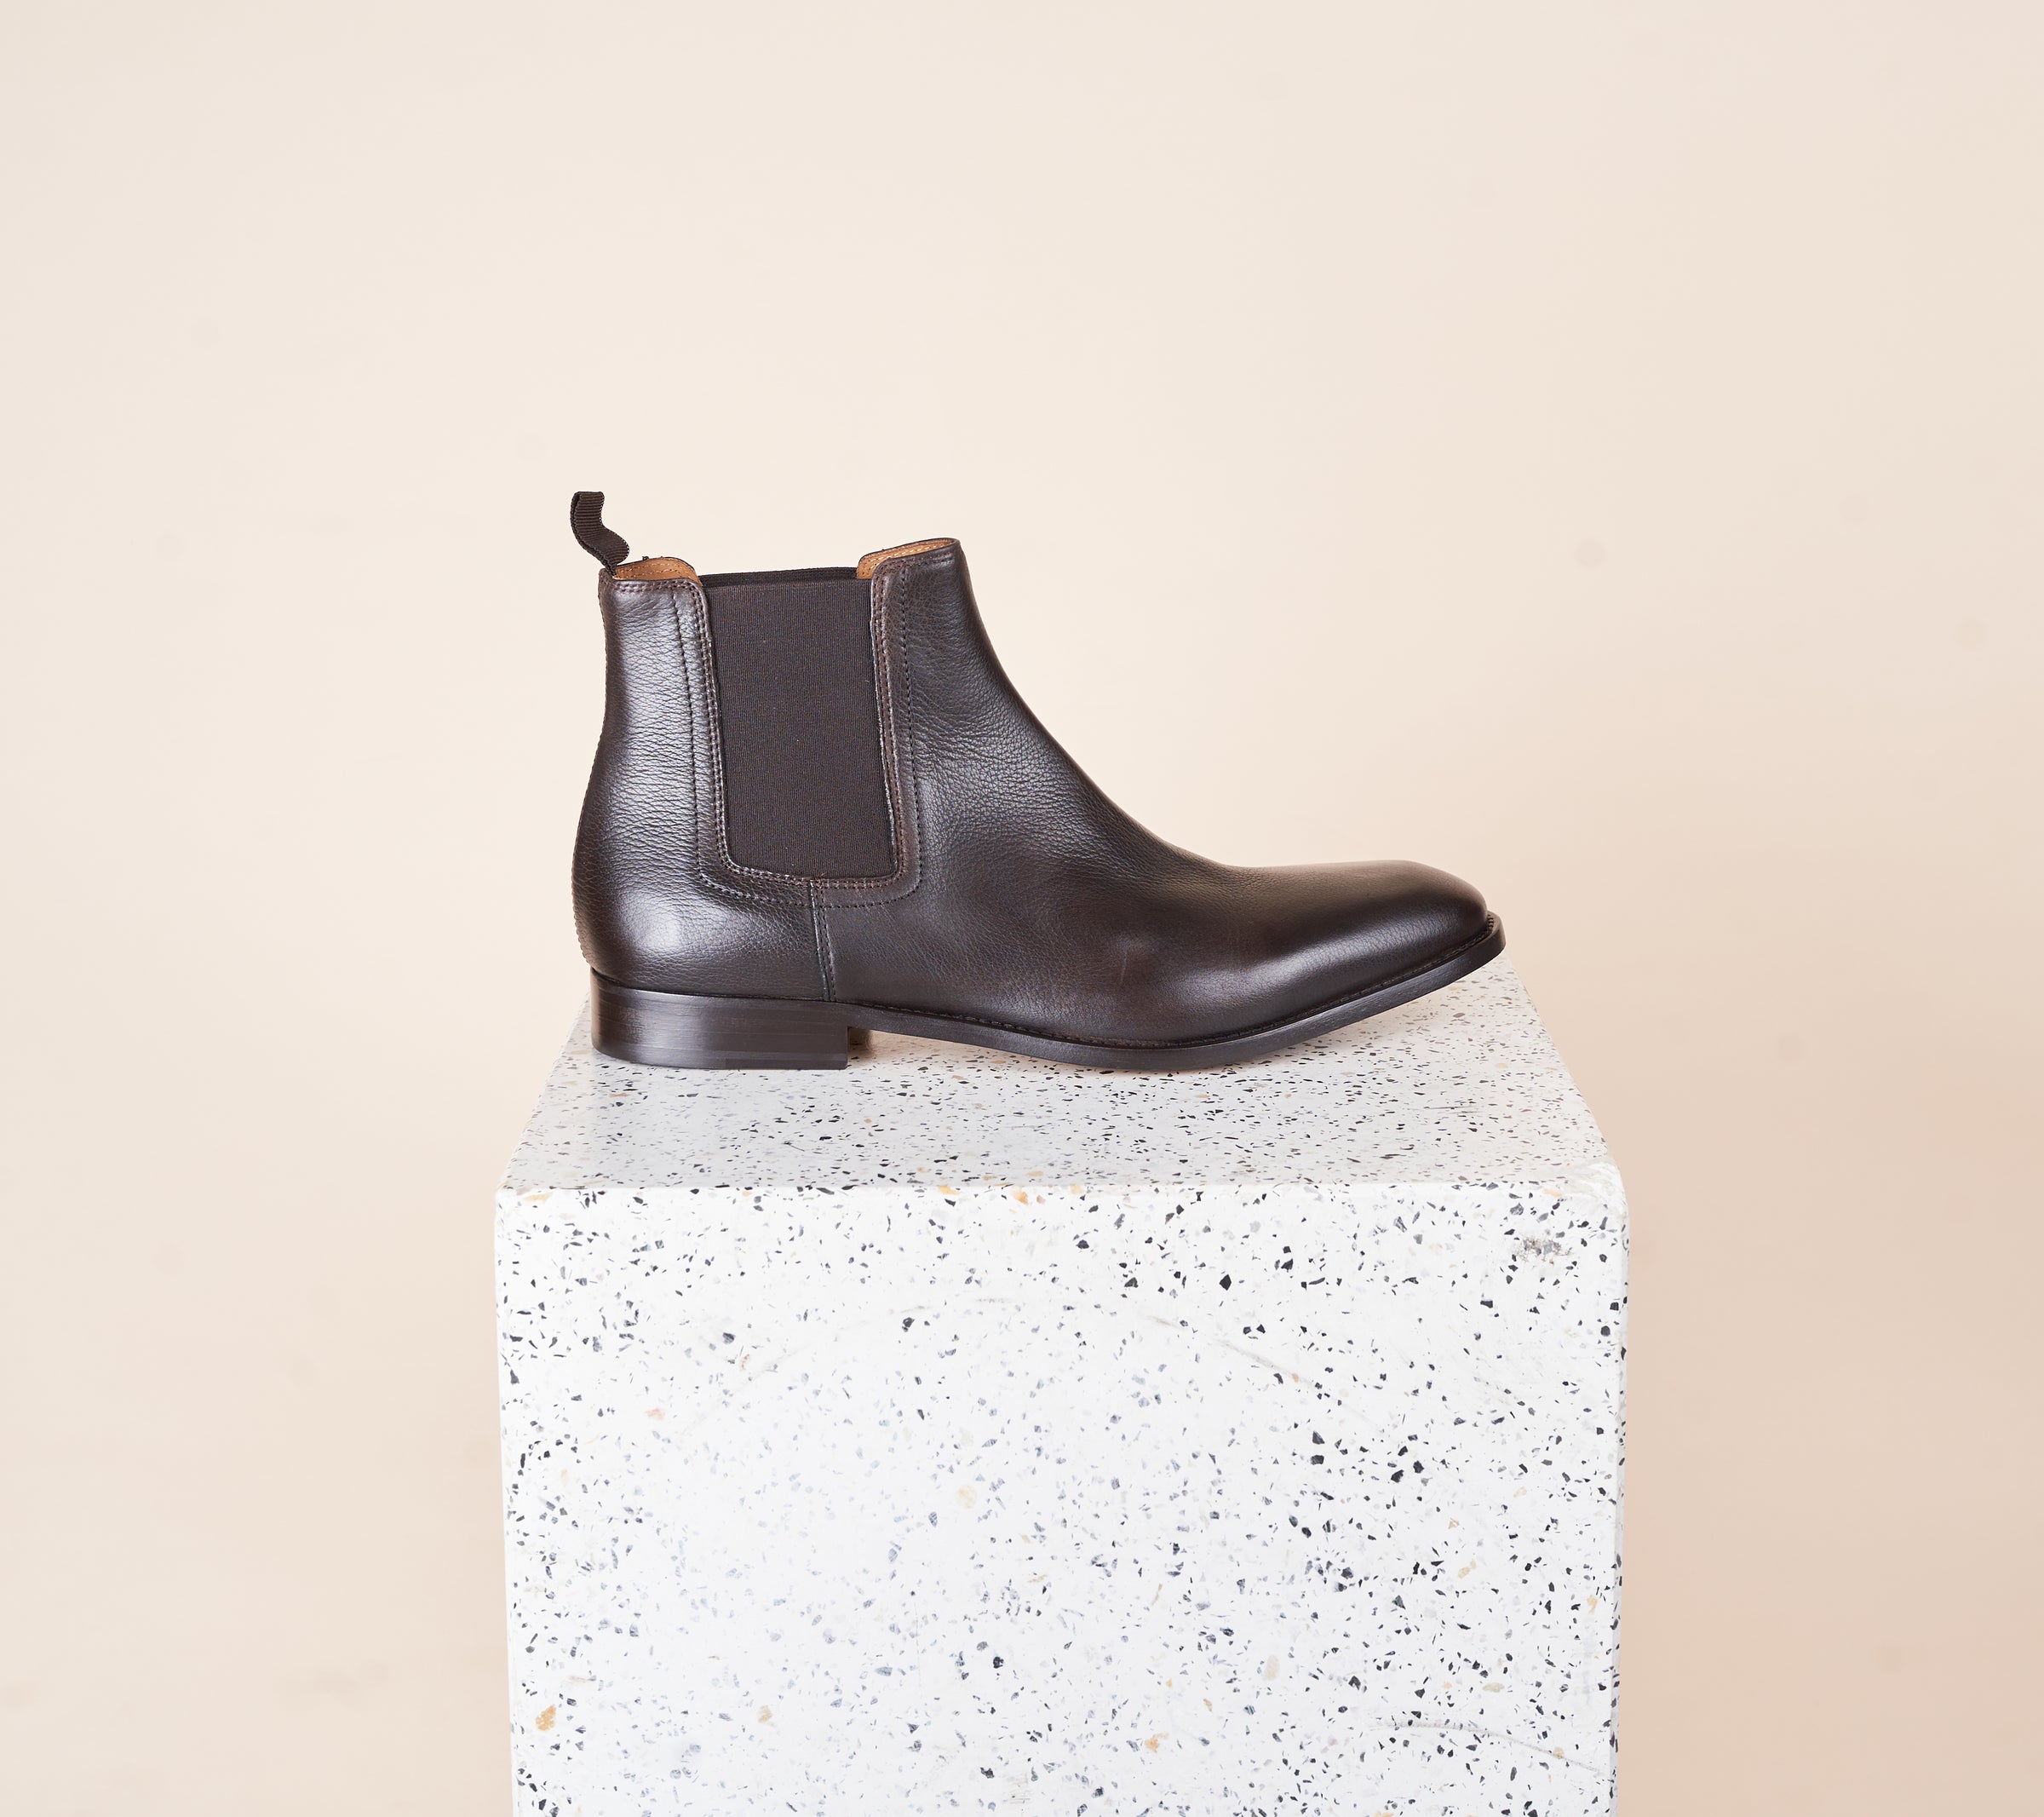 acceleration elektronisk is Lori - Men's Chelsea Boot Chocolate Leather – A. Soliani